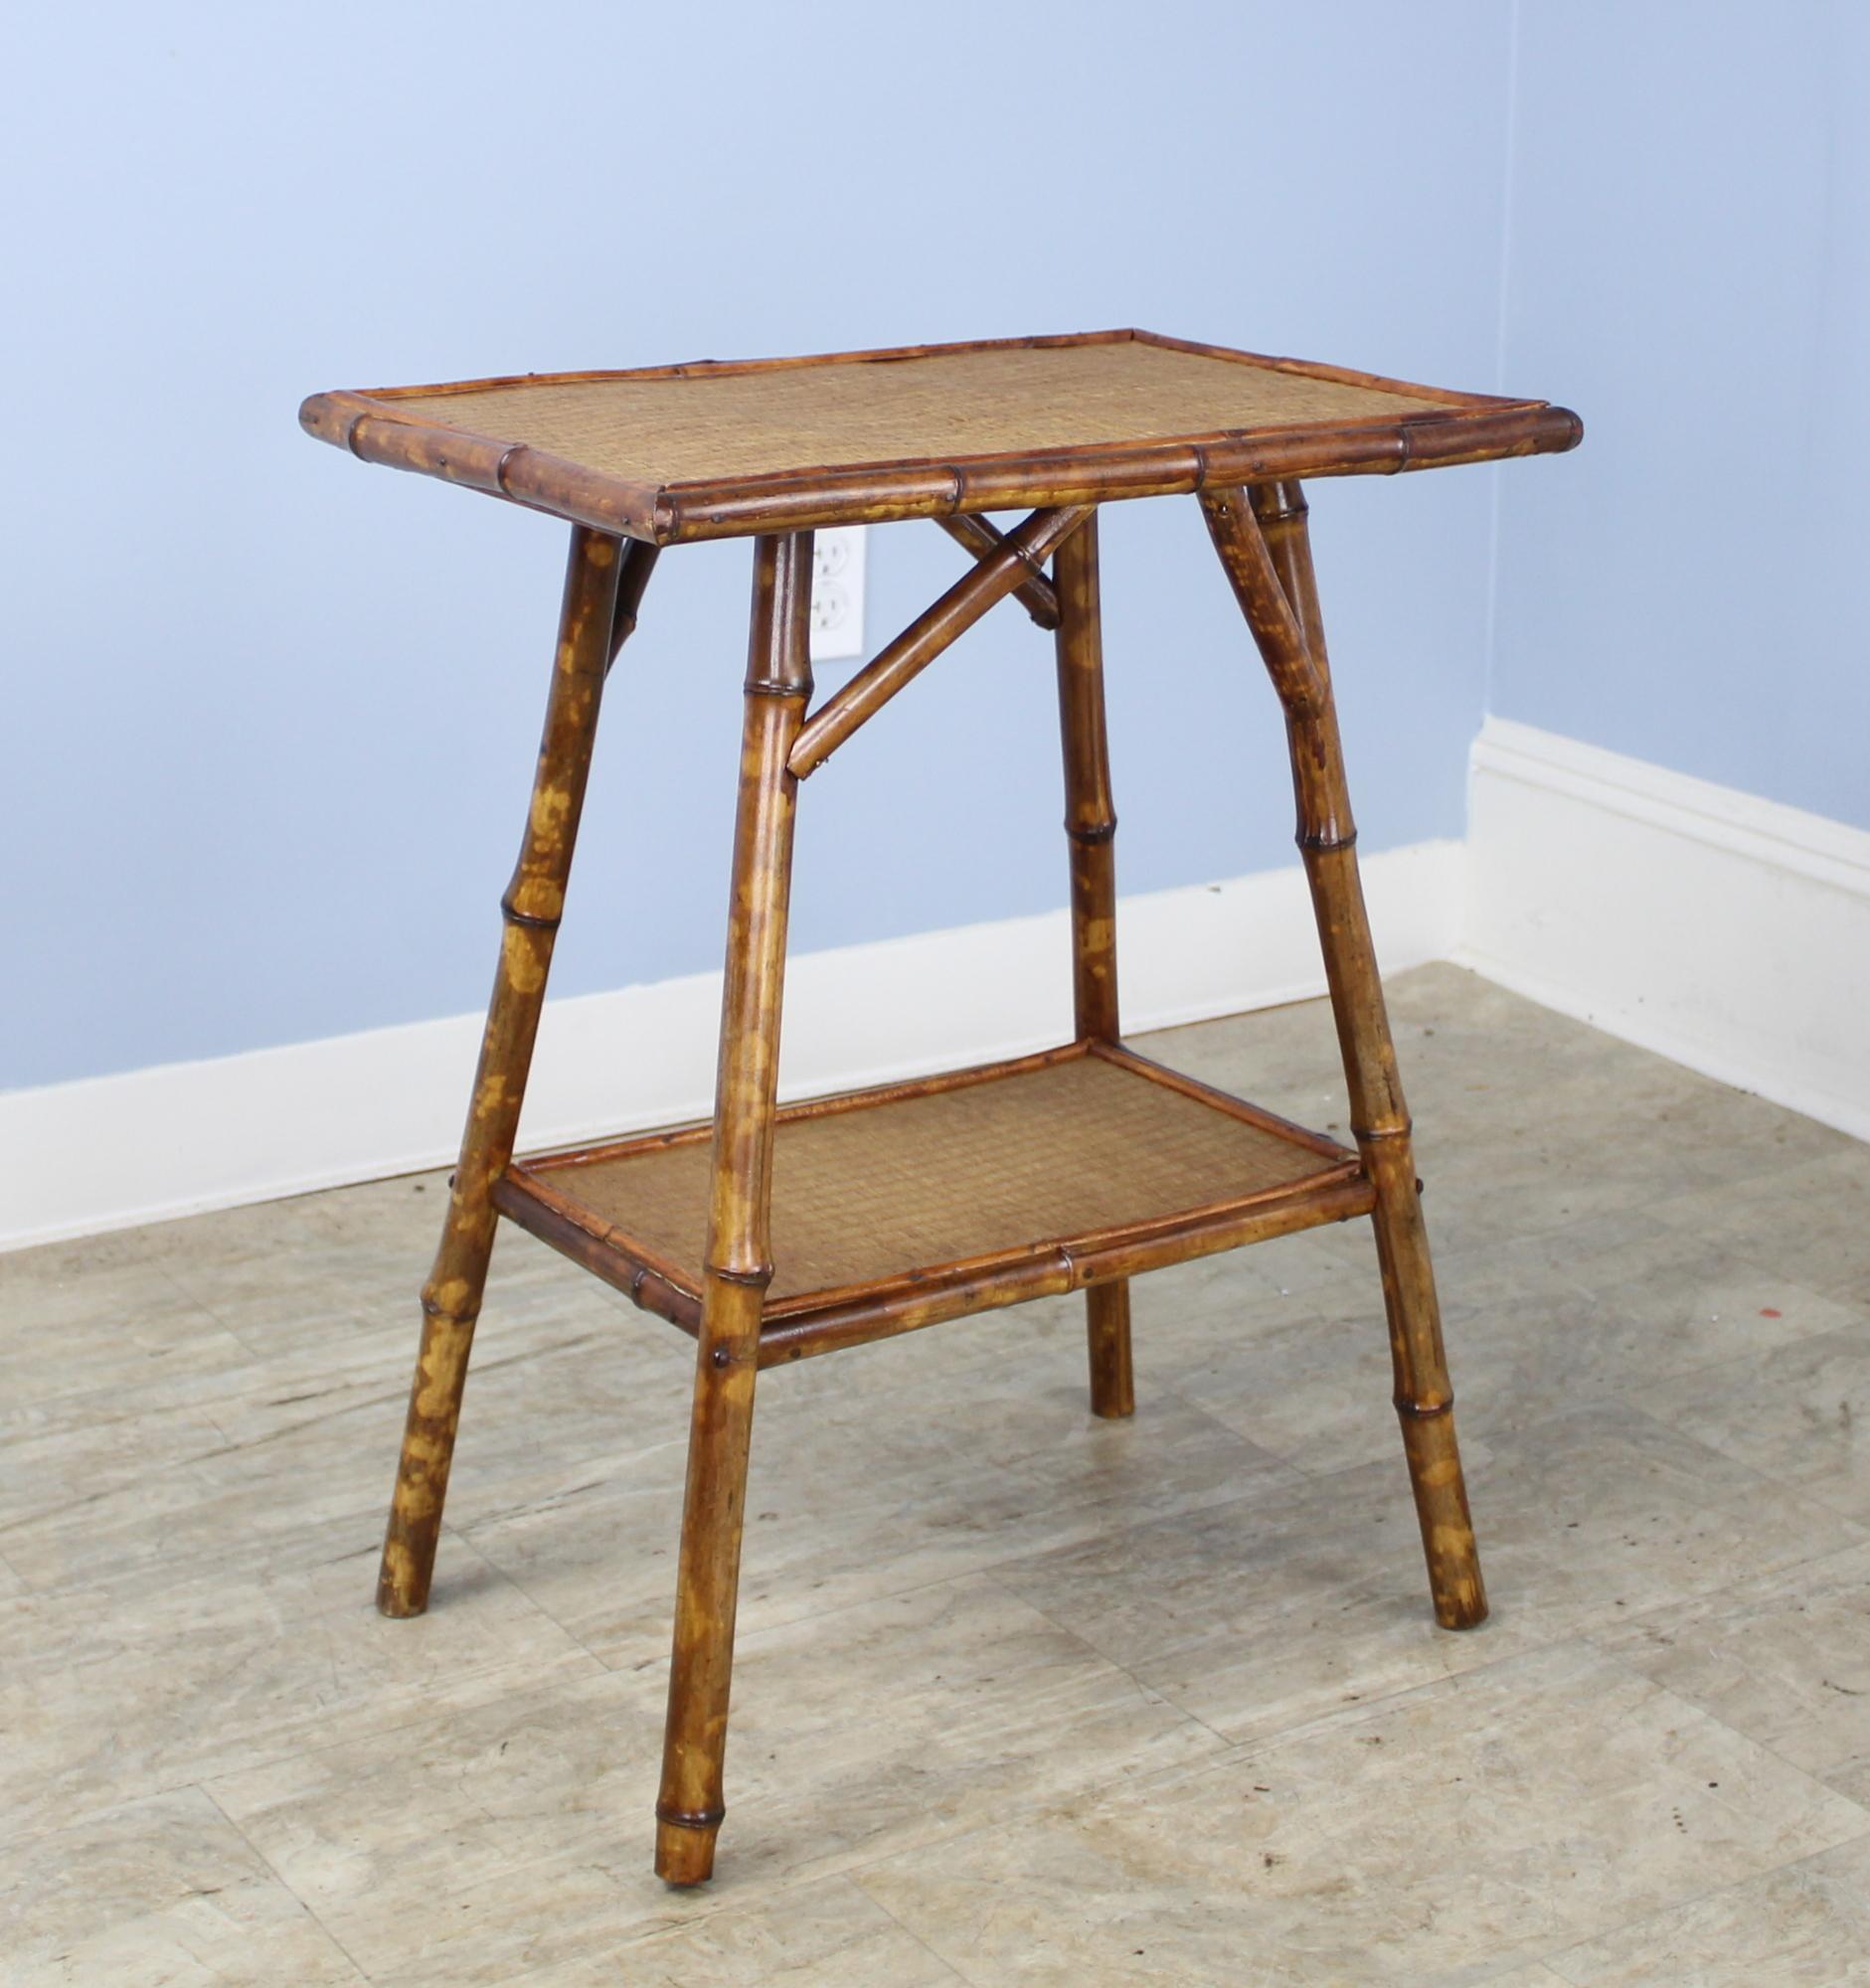 An antique English bamboo side table, with flared legs and with two shelves. Both shelves are made of tightly woven rattan that is in very good condition. The bamboo, vividly painted, is in good sturdy condition. Charming as an end or lamp table.